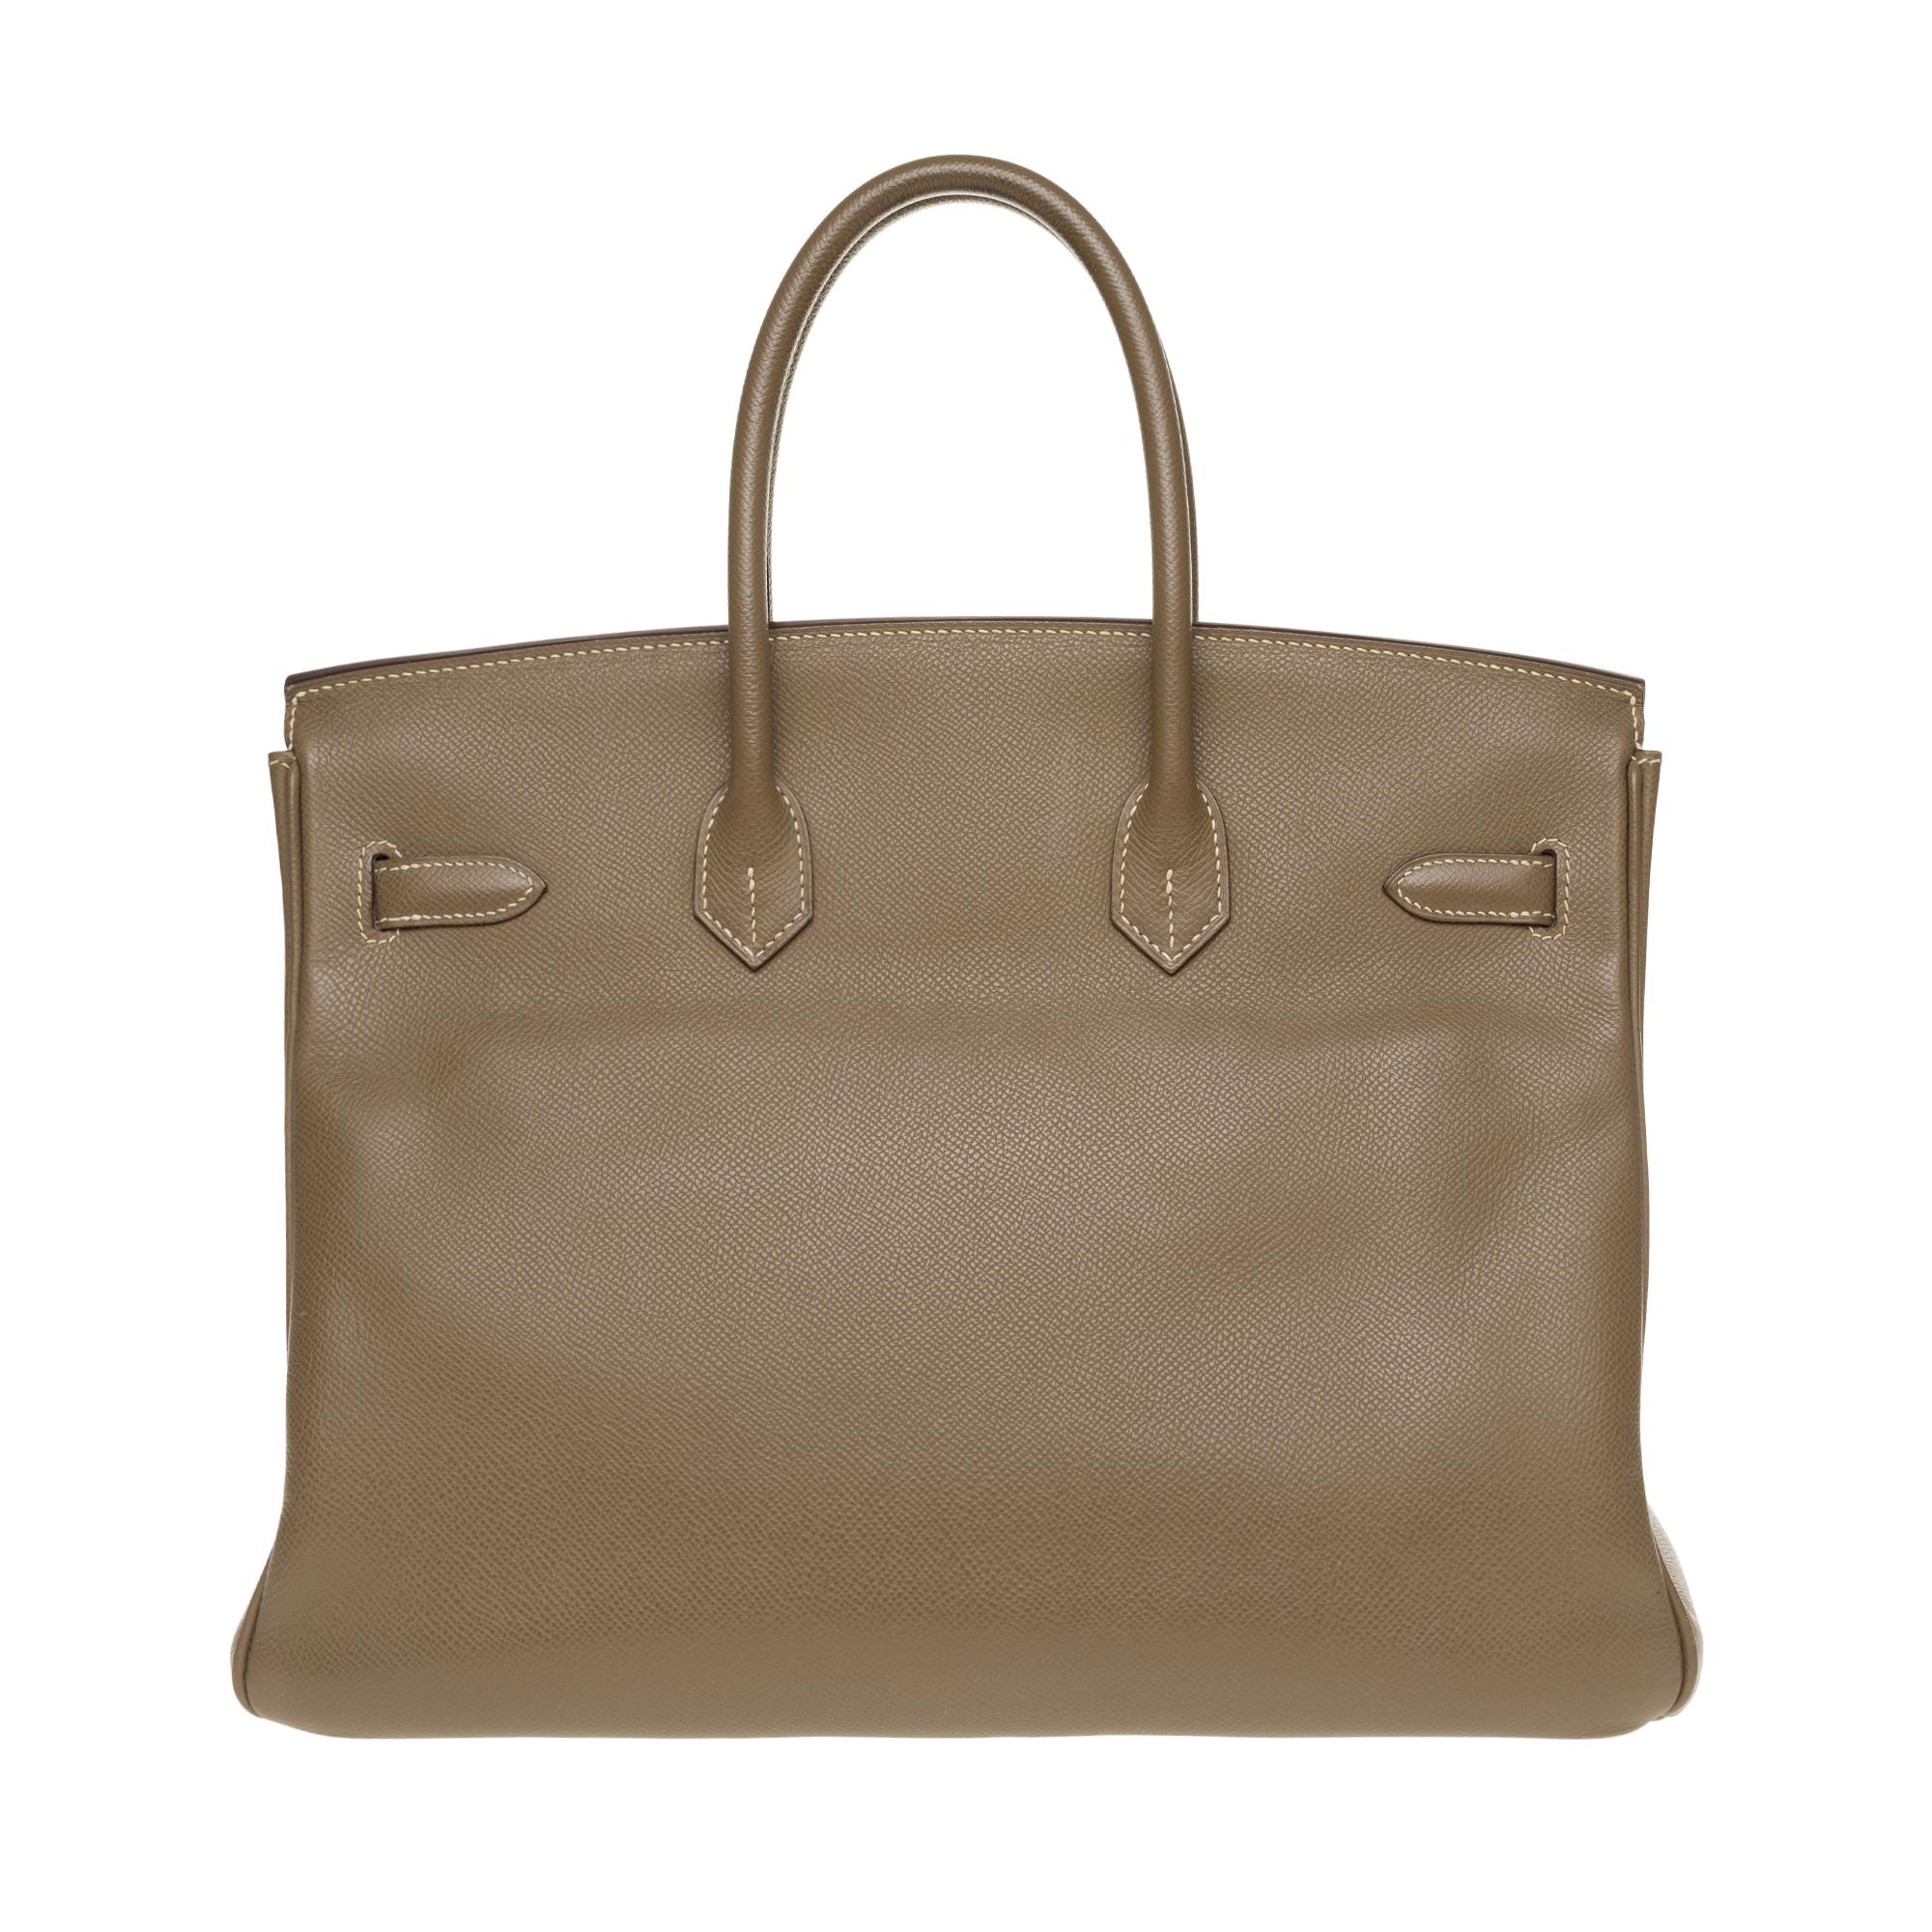 Stunning handbag Hermes Birkin 35 cm in Epsom Etoupe, Silver metal trim, double handle in étoupe leather allowing a handheld.

Closure by flap.
Taupe leather inner lining, zip pocket, patch pocket.
Signature: 